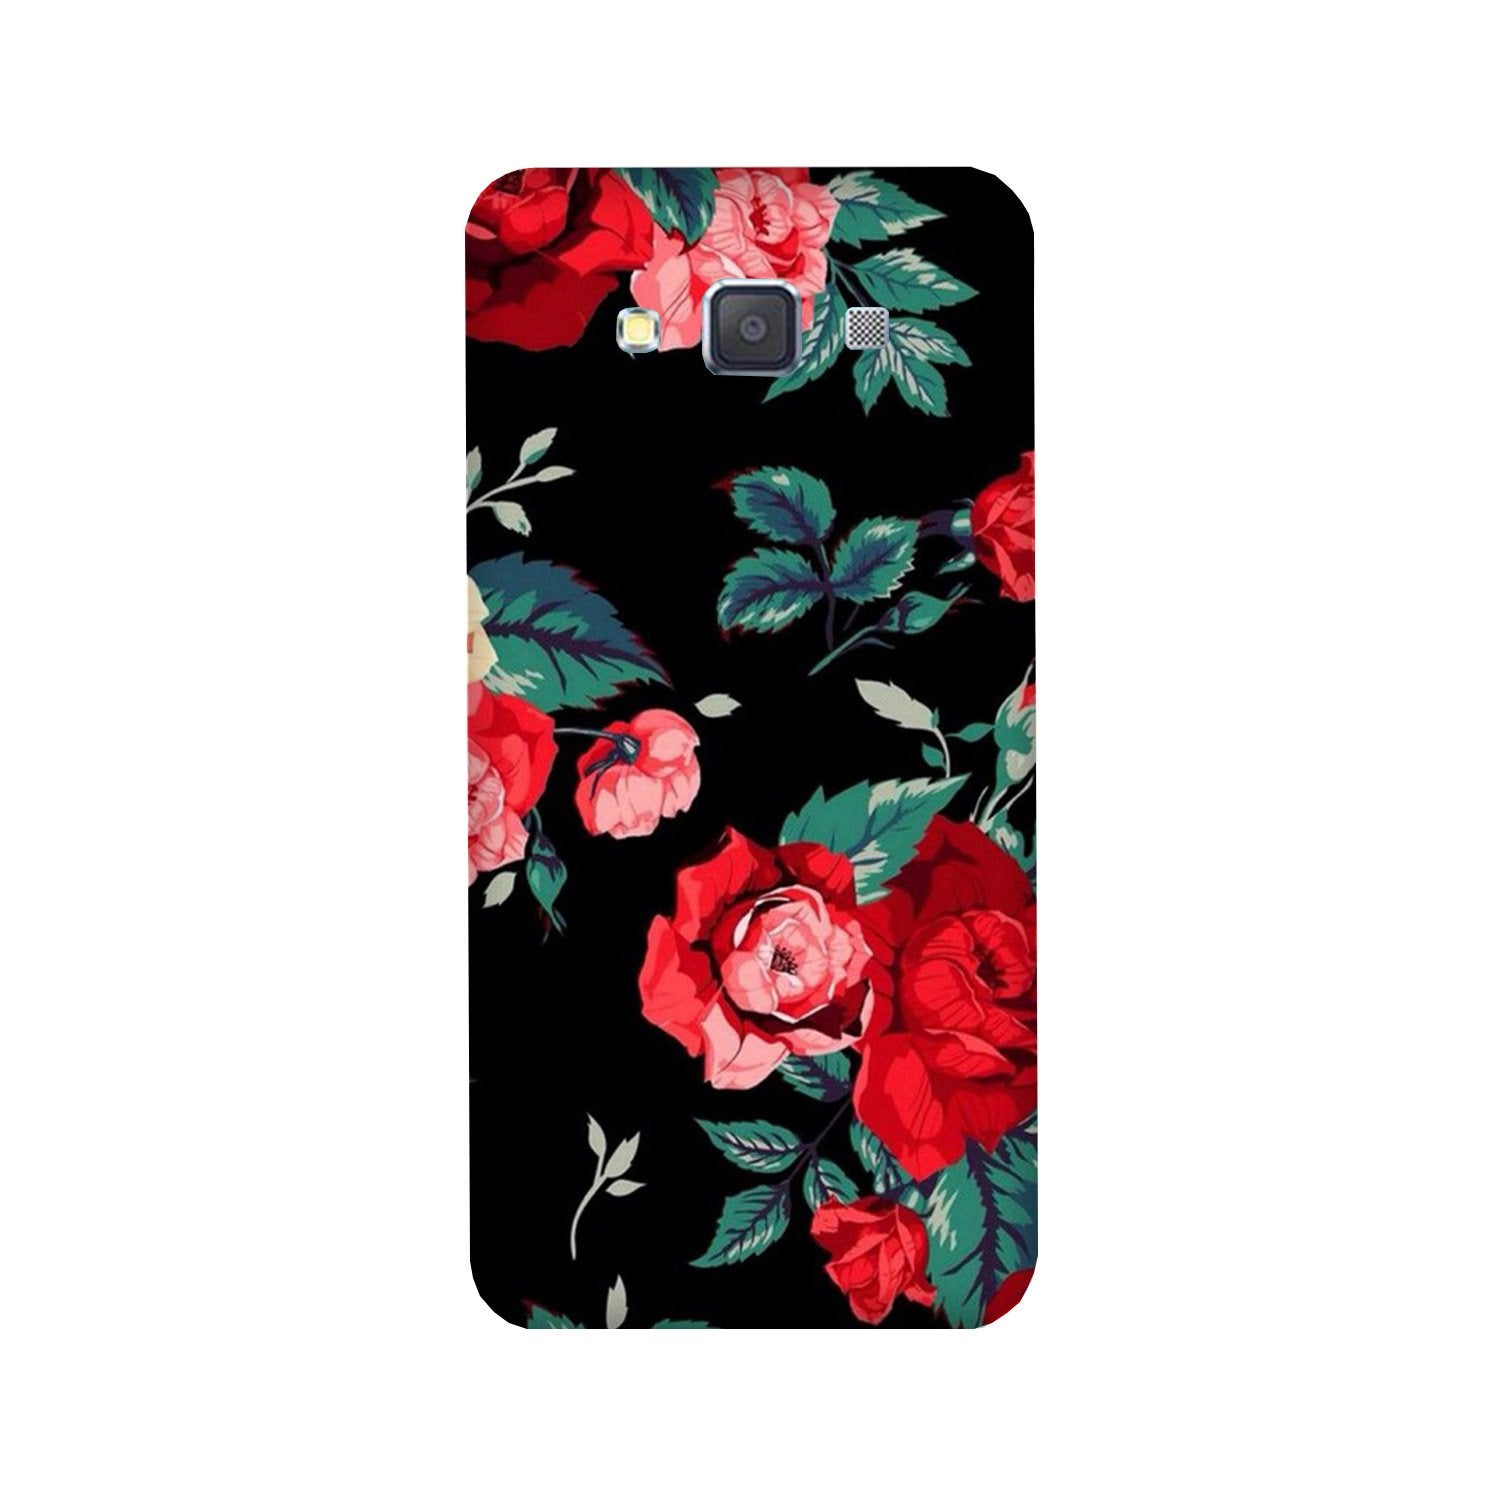 Red Rose2 Case for Galaxy A5 (2015)